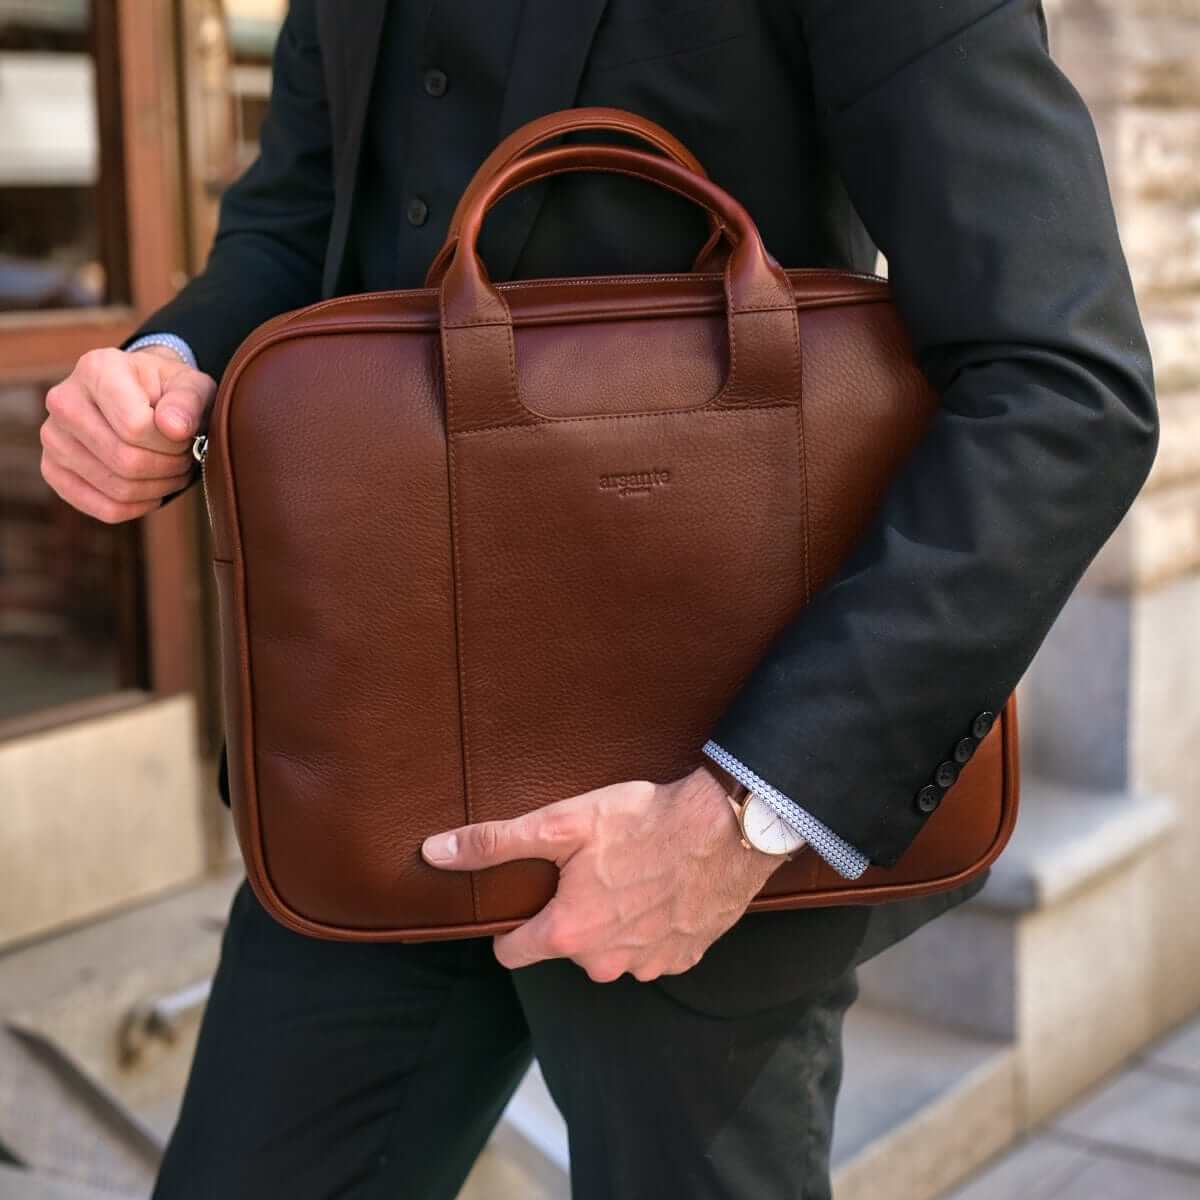 Leather Laptop Bag  Quality Real Full Grain Briefcase